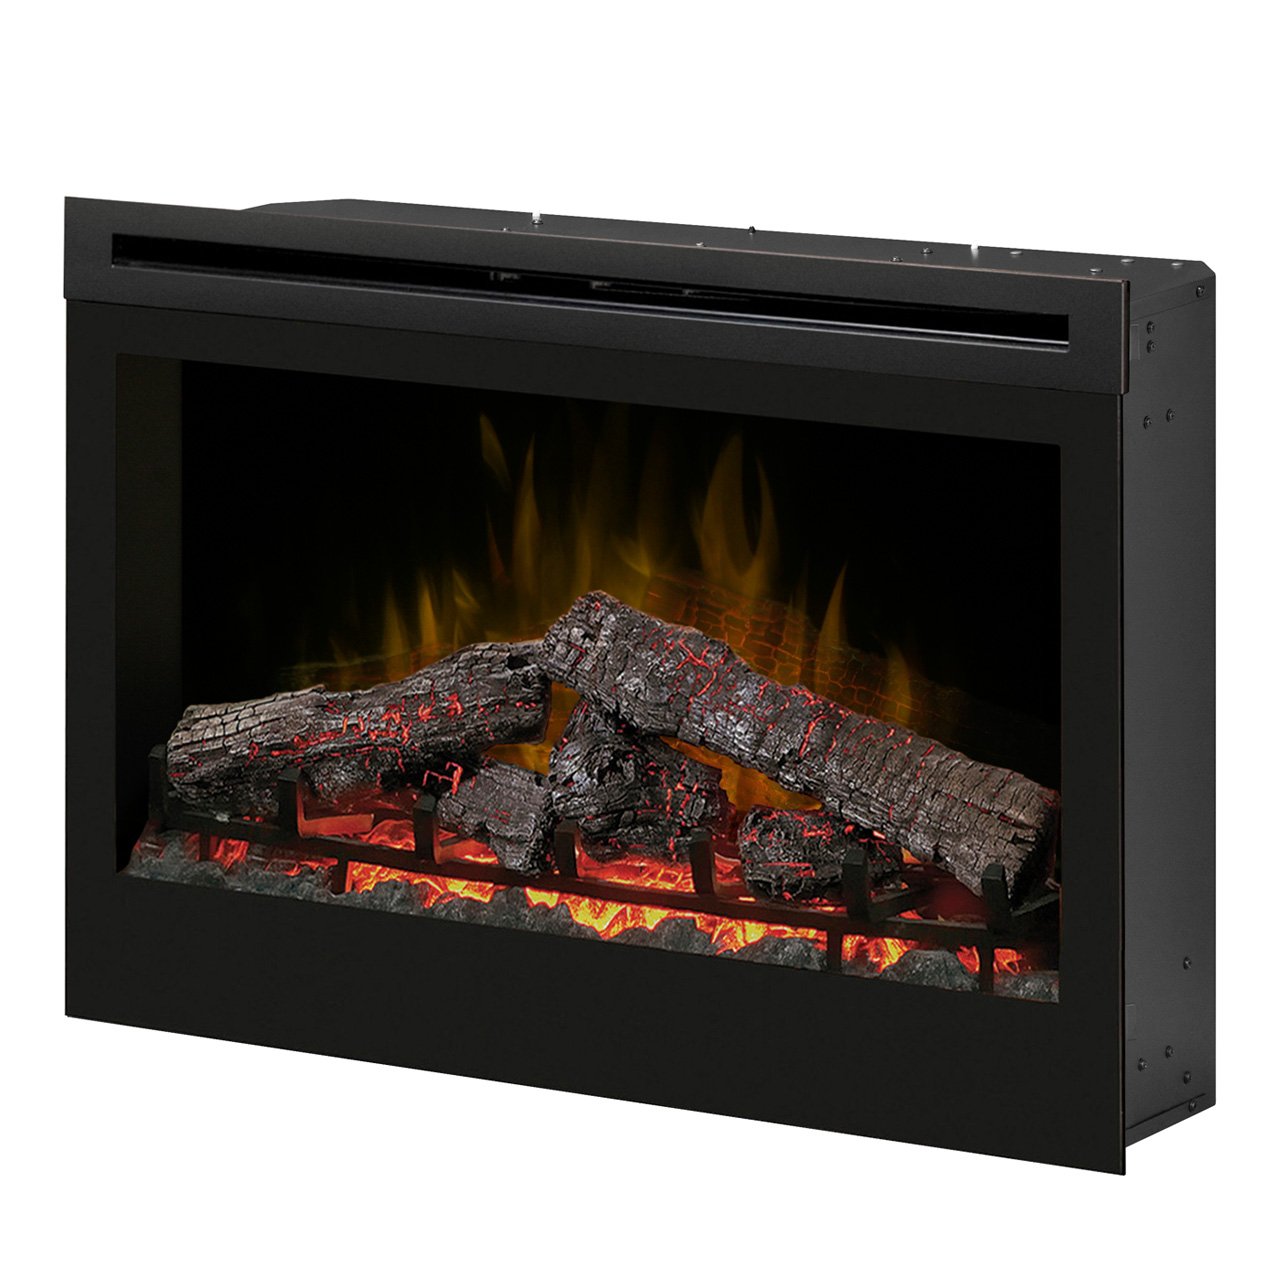 Gas Fireplace Insert Unique Dimplex Df3033st 33 Inch Self Trimming Electric Fireplace Insert